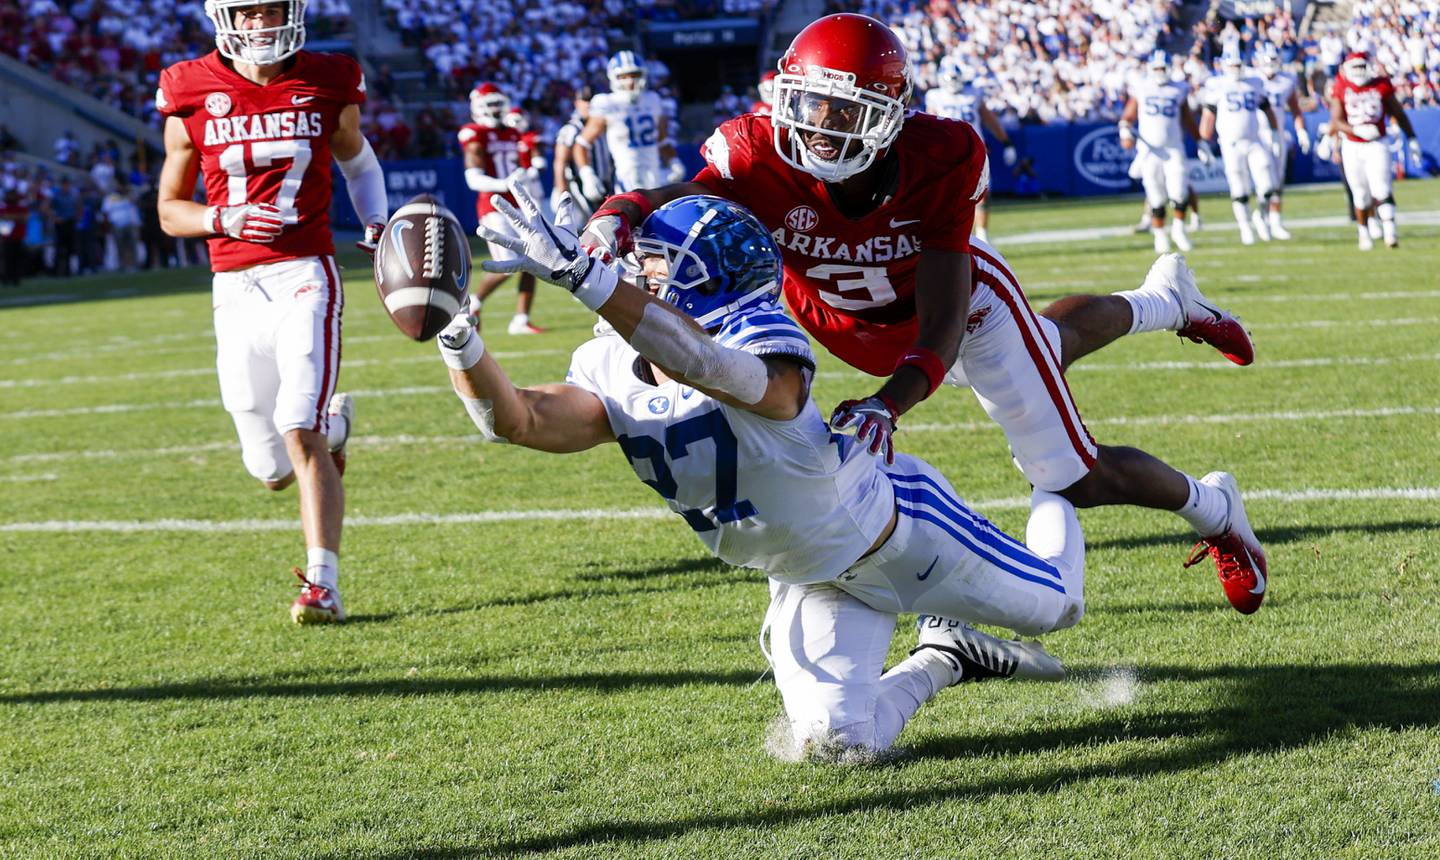 BYU wide receiver Chase Robberts (27) drops a pass while defended by Arkansas' Dwight McGlothern (3) during a game in Provo, Utah, on Saturday,